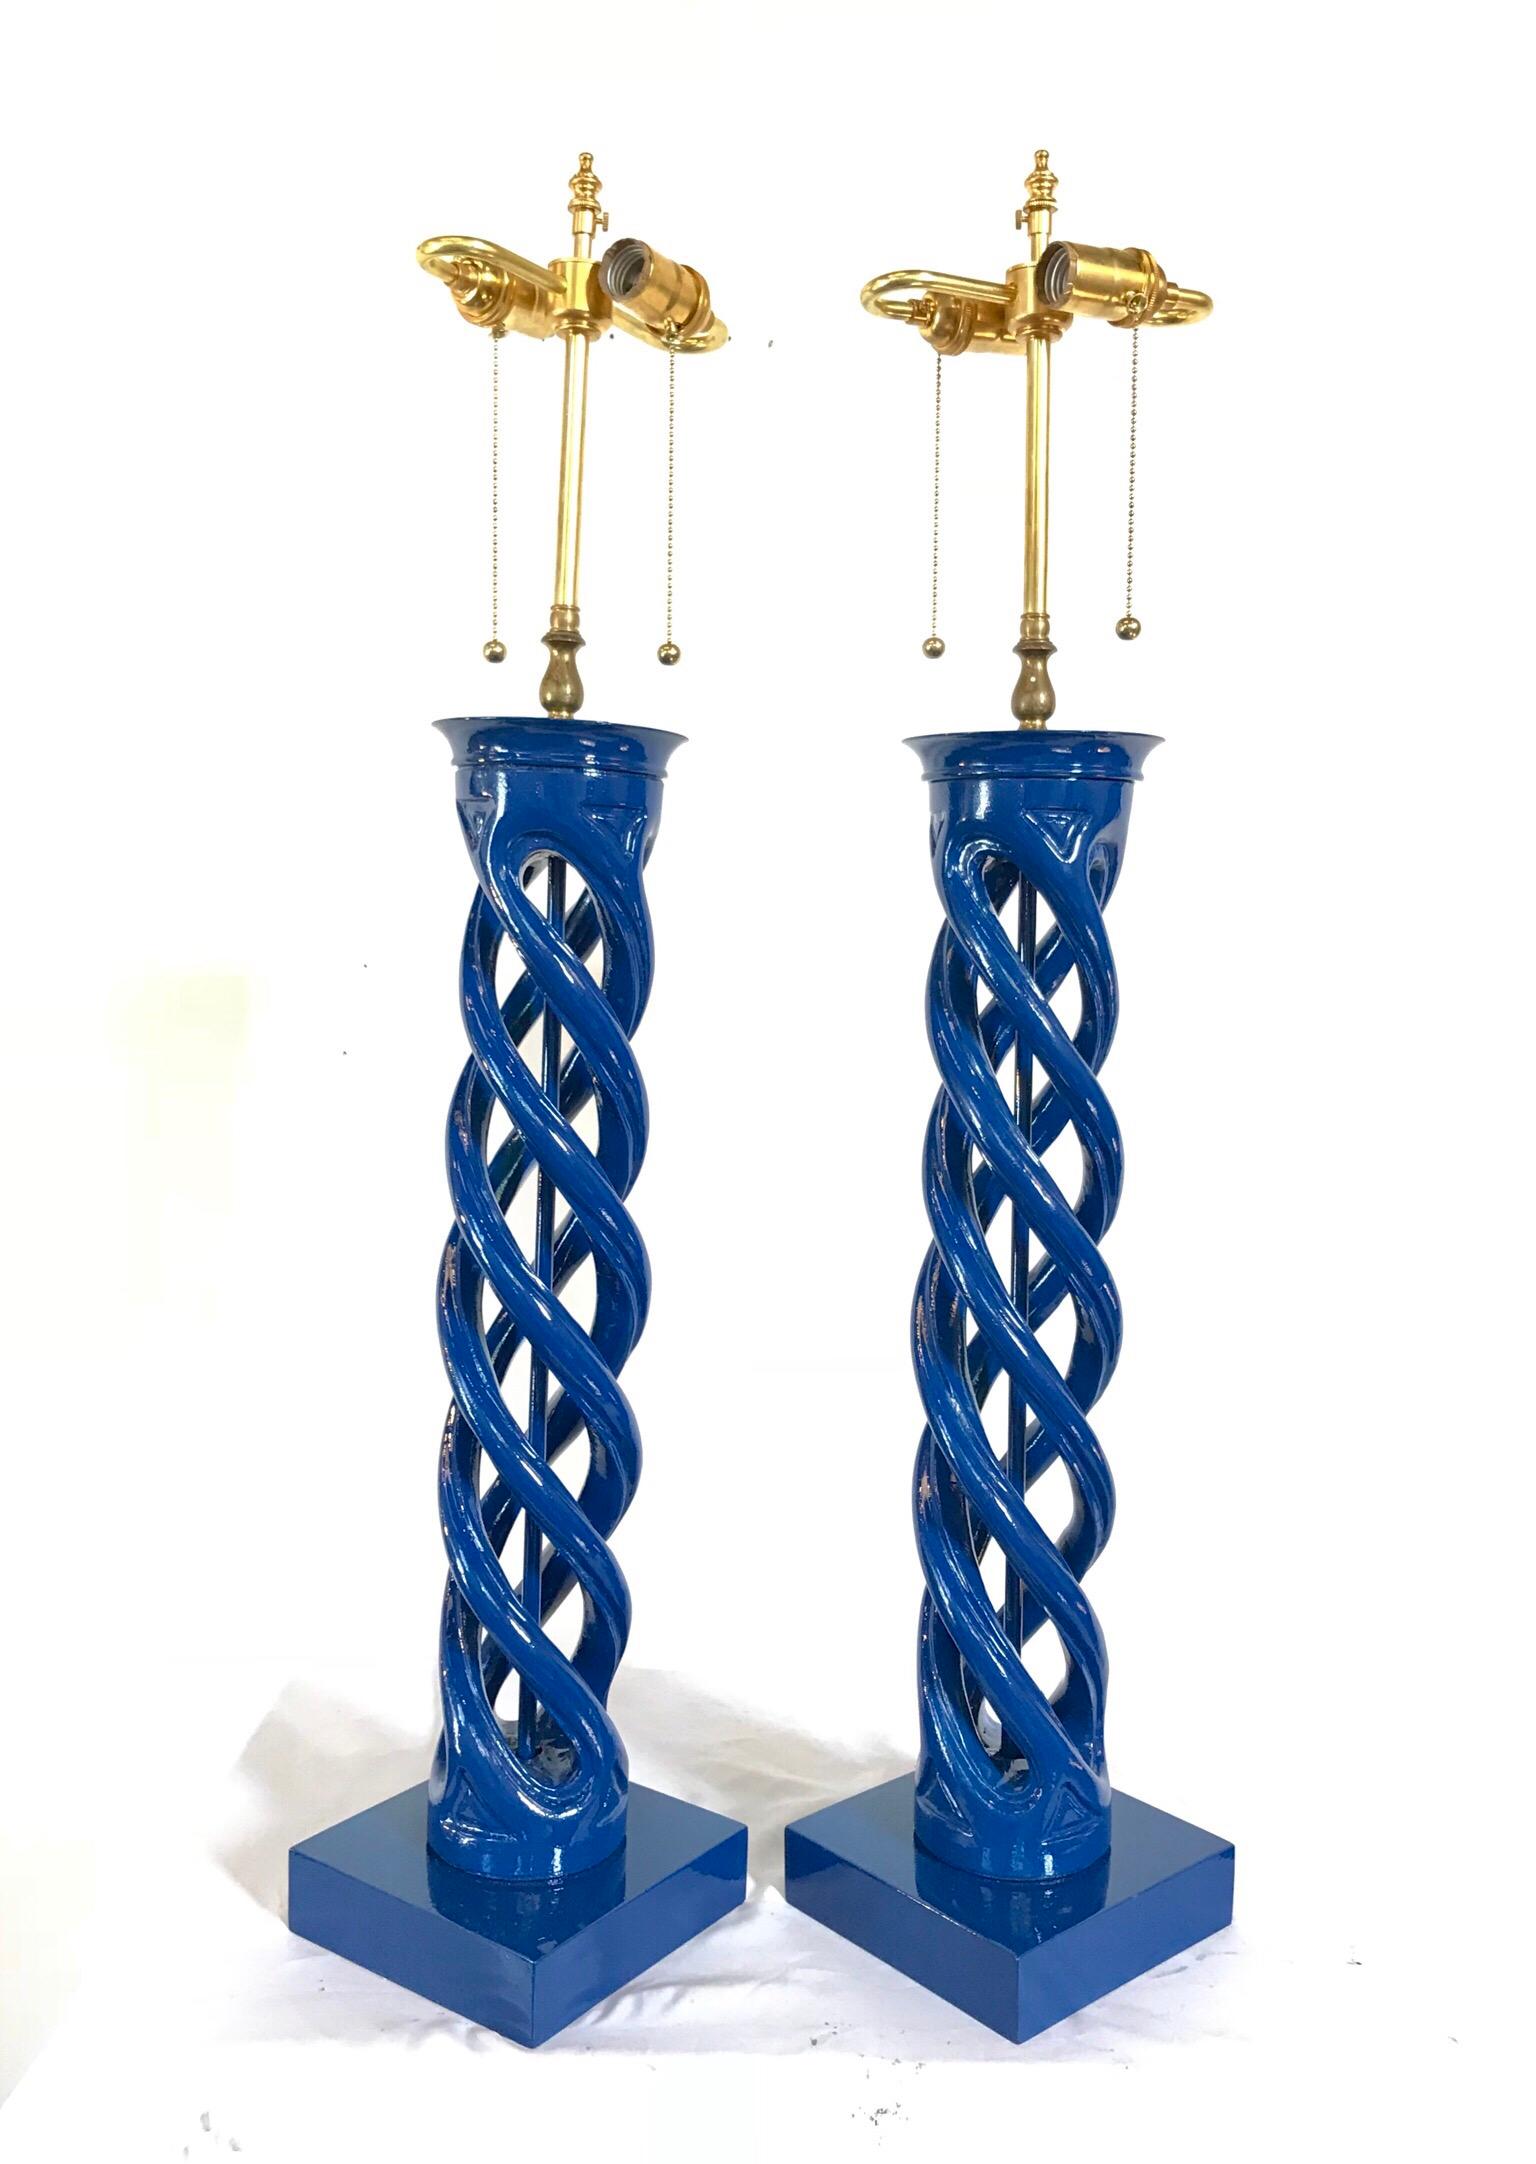 American Mid-Century Modern Frederick Cooper Double Helix Form Lamps, a Pair For Sale